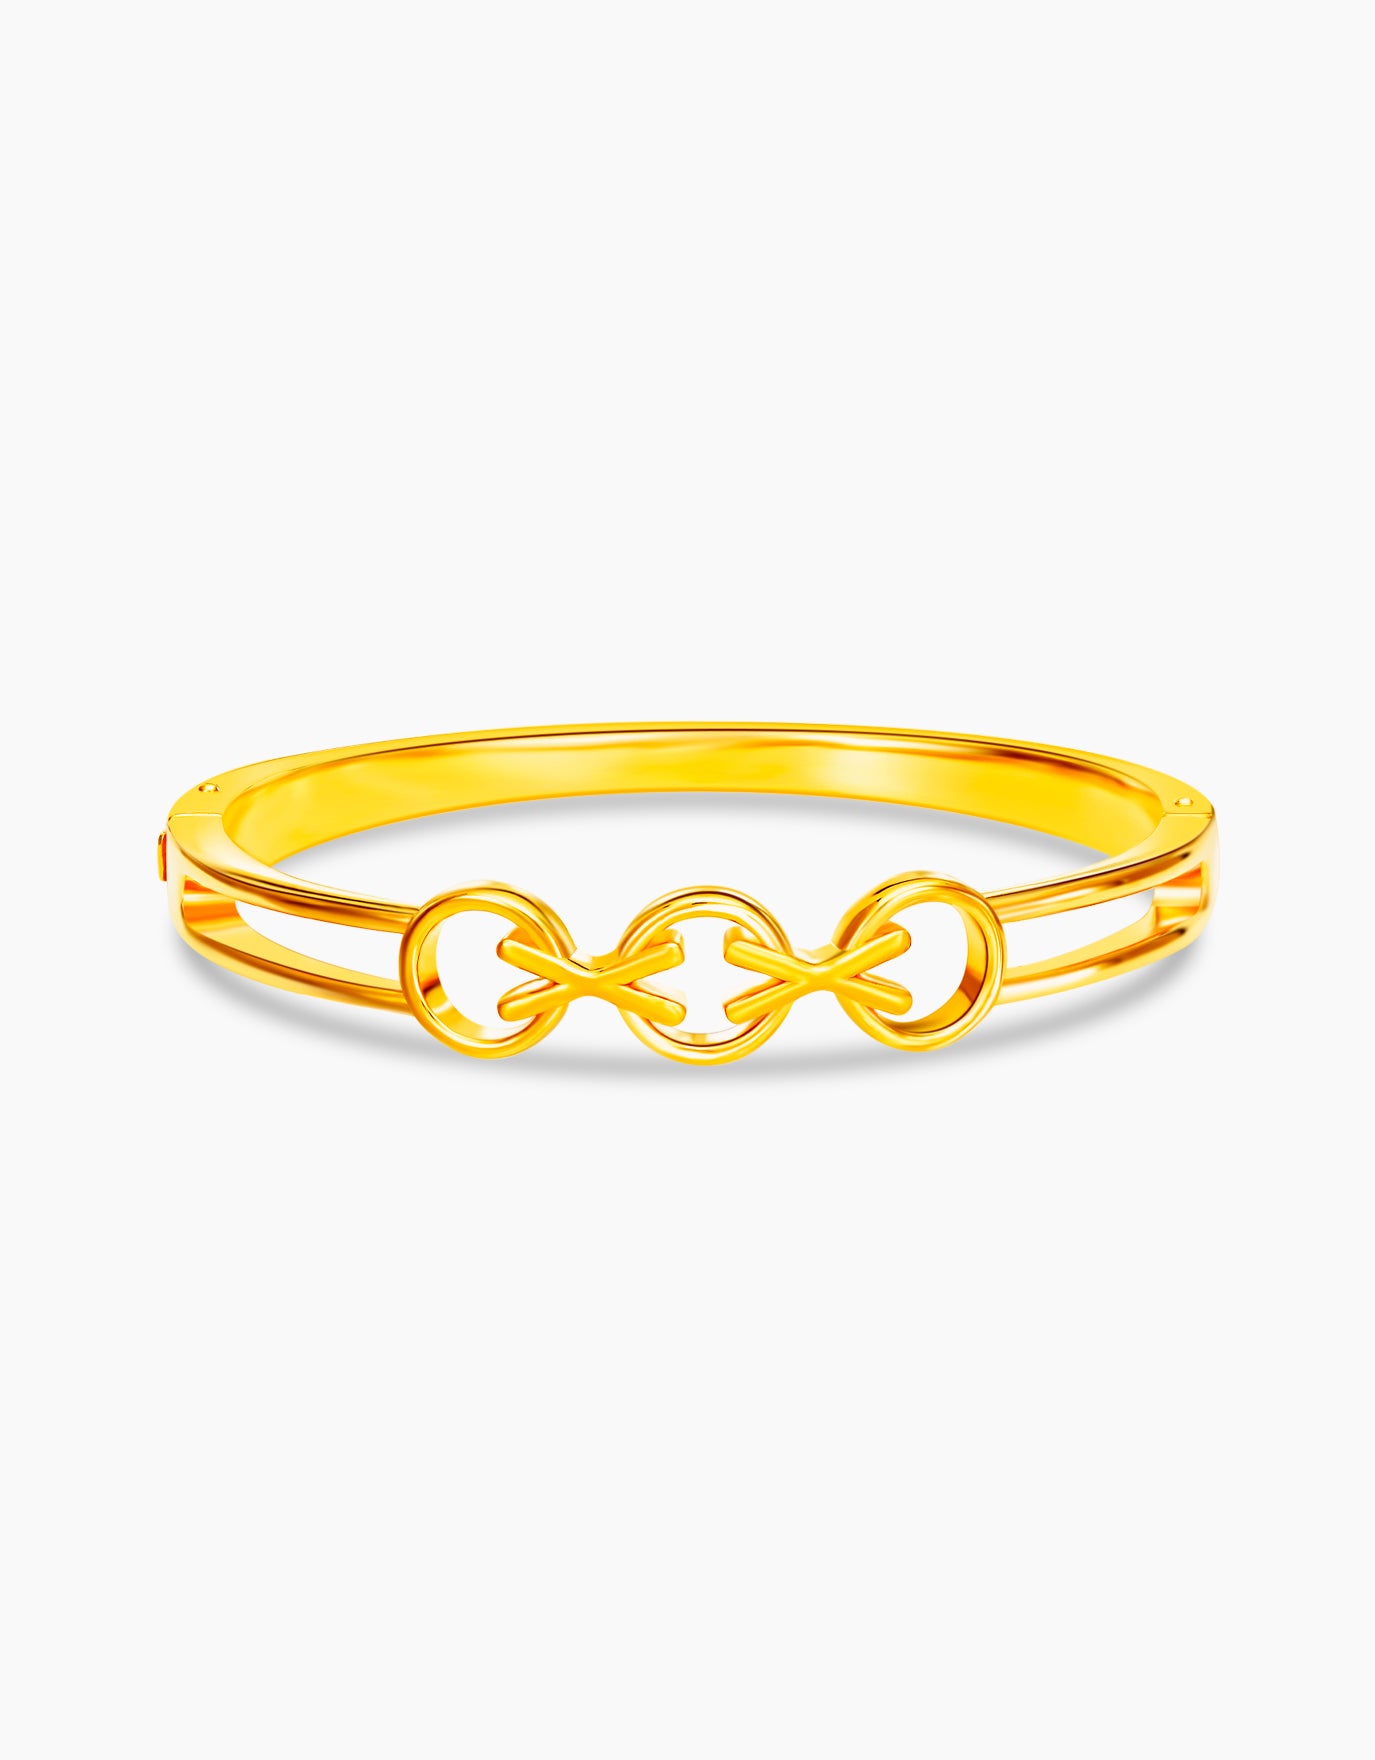 LVC 9IN Eclipse 999 Gold Bangle